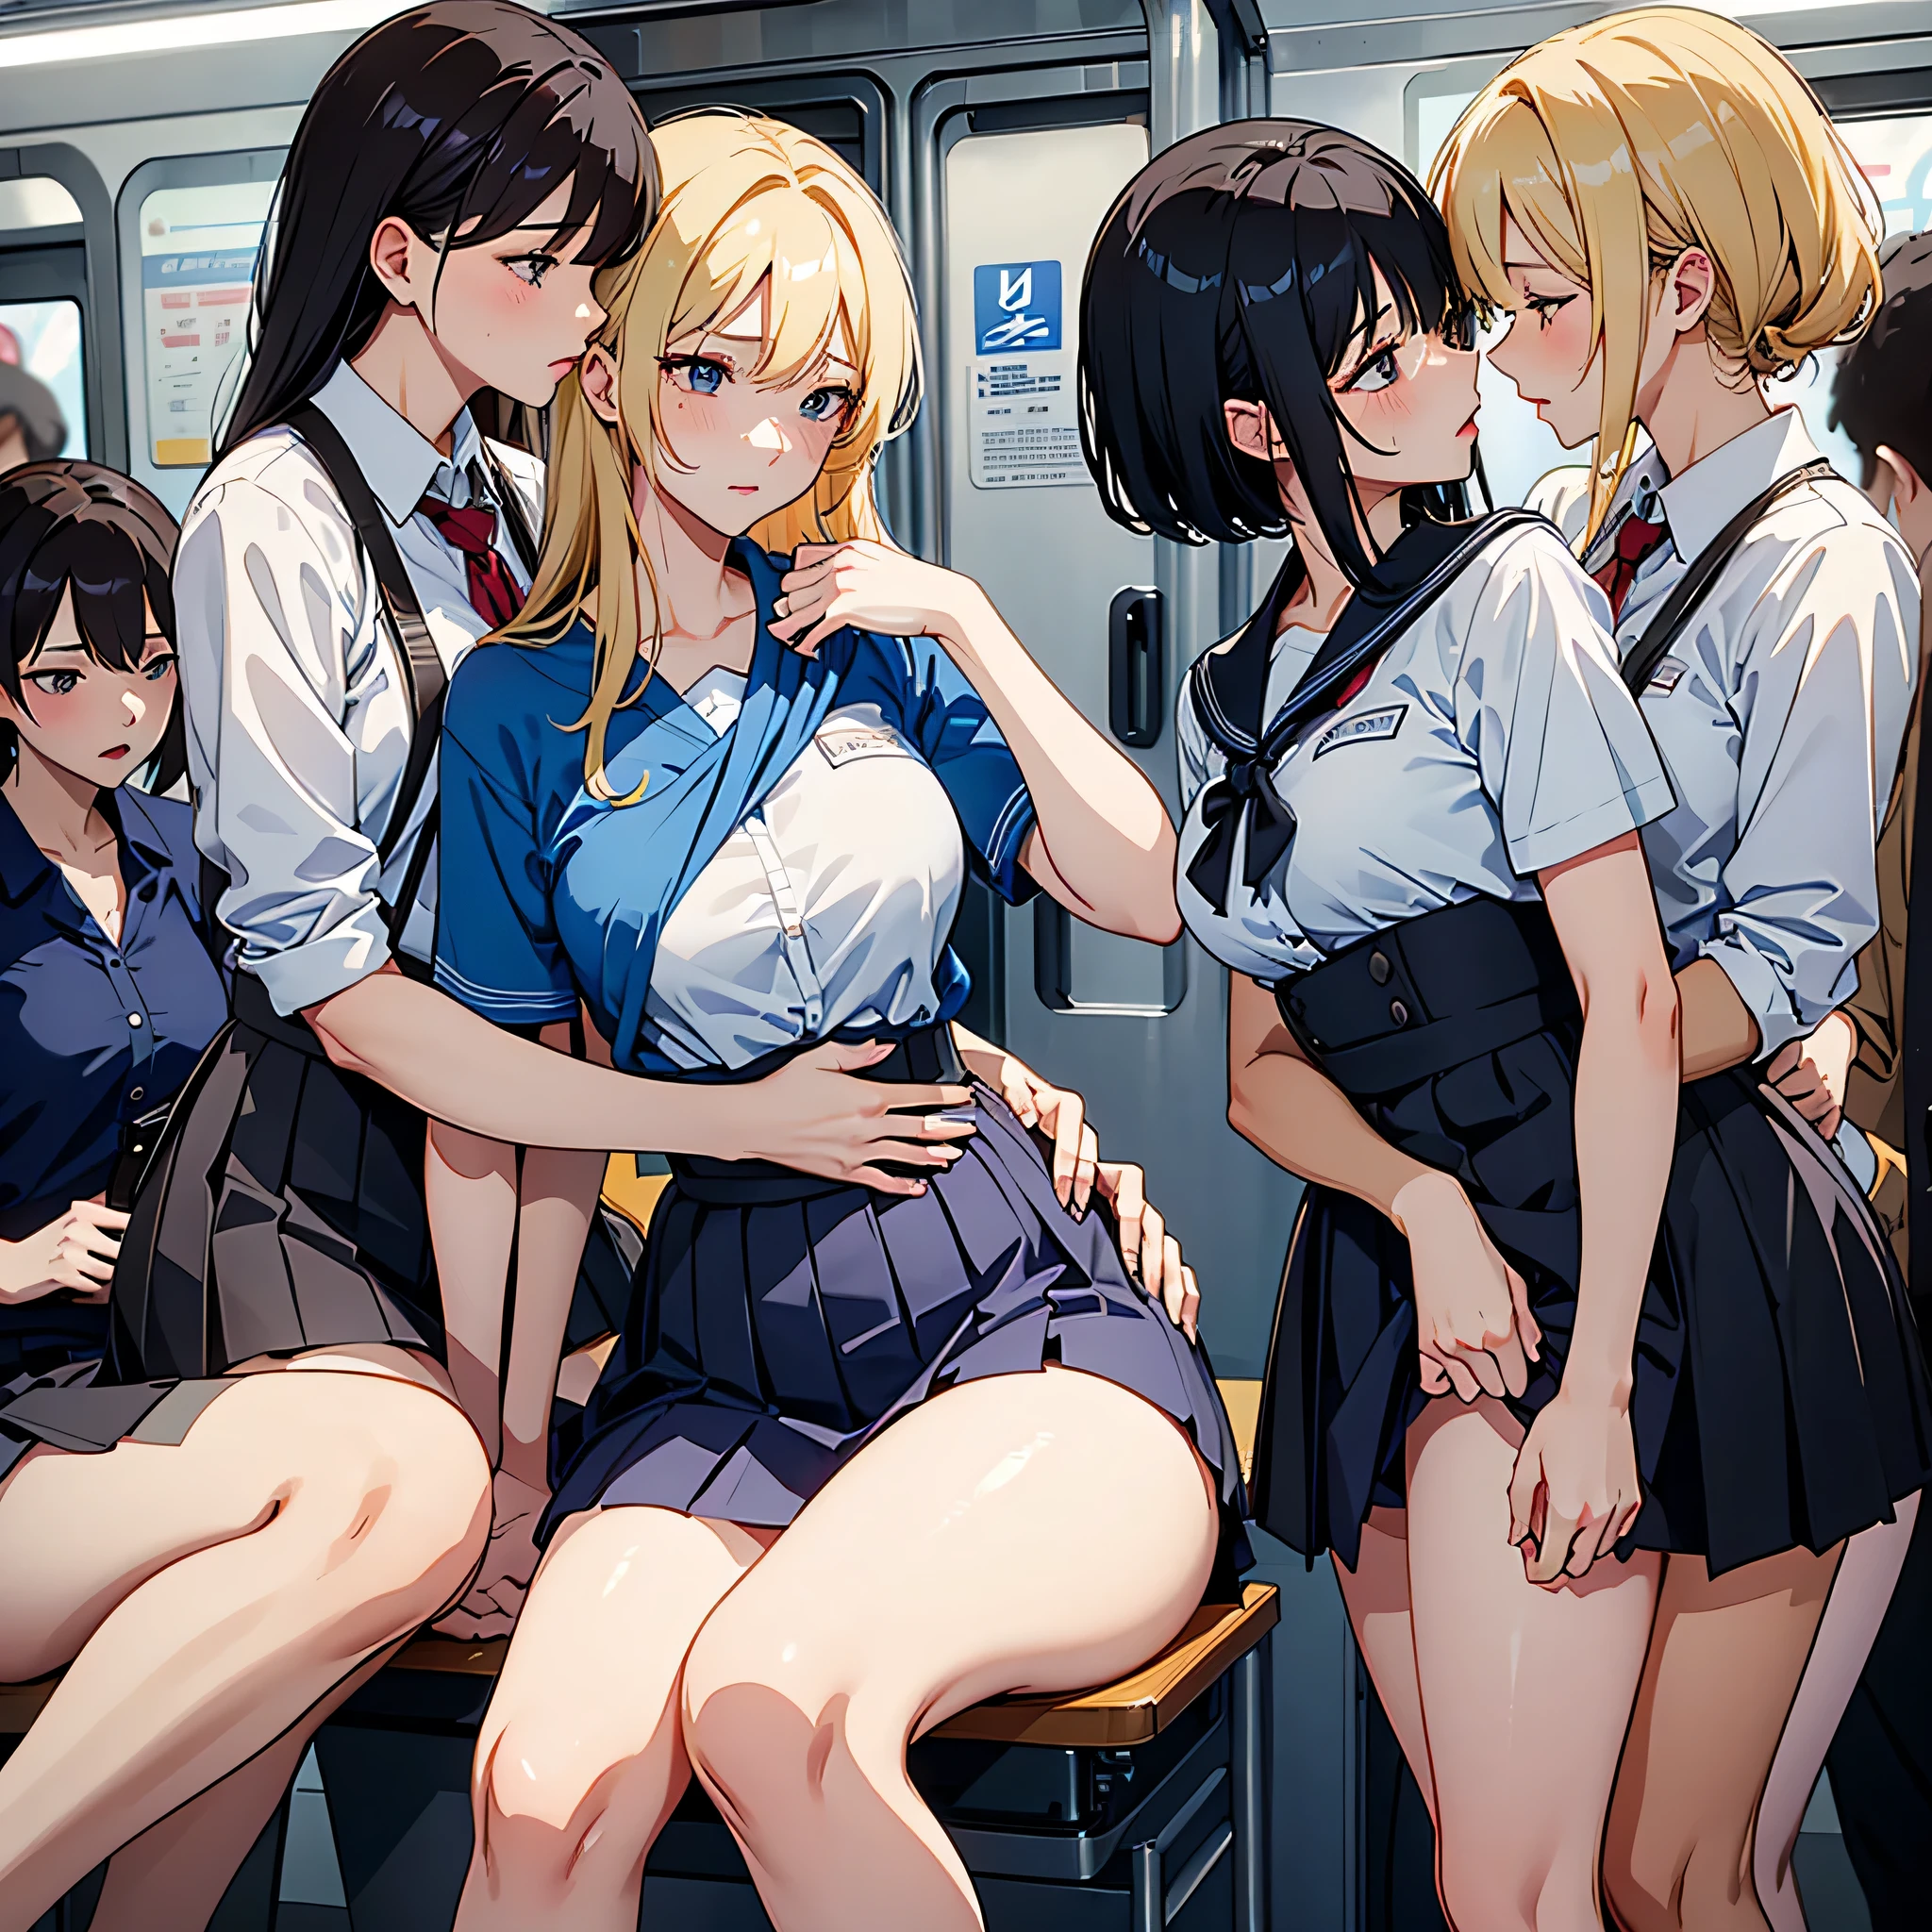 NSFW, photorealistic, top-quality, masterpiece, 4 Korean women , Korean female only, ABSOLUTELY NO MALE, absolutely no men, VERY crowded female only subway train interior detailed scenario, VERY crowded Korean female only subway train interior detailed background, standing insanely hot (woman 1) using sexy ((school uniform)), (((lifted skirt)), (thick thighs), (fear expression), blushed face, (woman 2) sexy young, blond hair, confused look, mature woman ass groping woman 1 from behind, woman 2 touches woman 1 vagina, young woman 2 caressing woman 1 legs, wet kiss, lesbian kiss,  (((mature woman pressing her chest on woman 1 back))) and (((holding her waist behind her)))